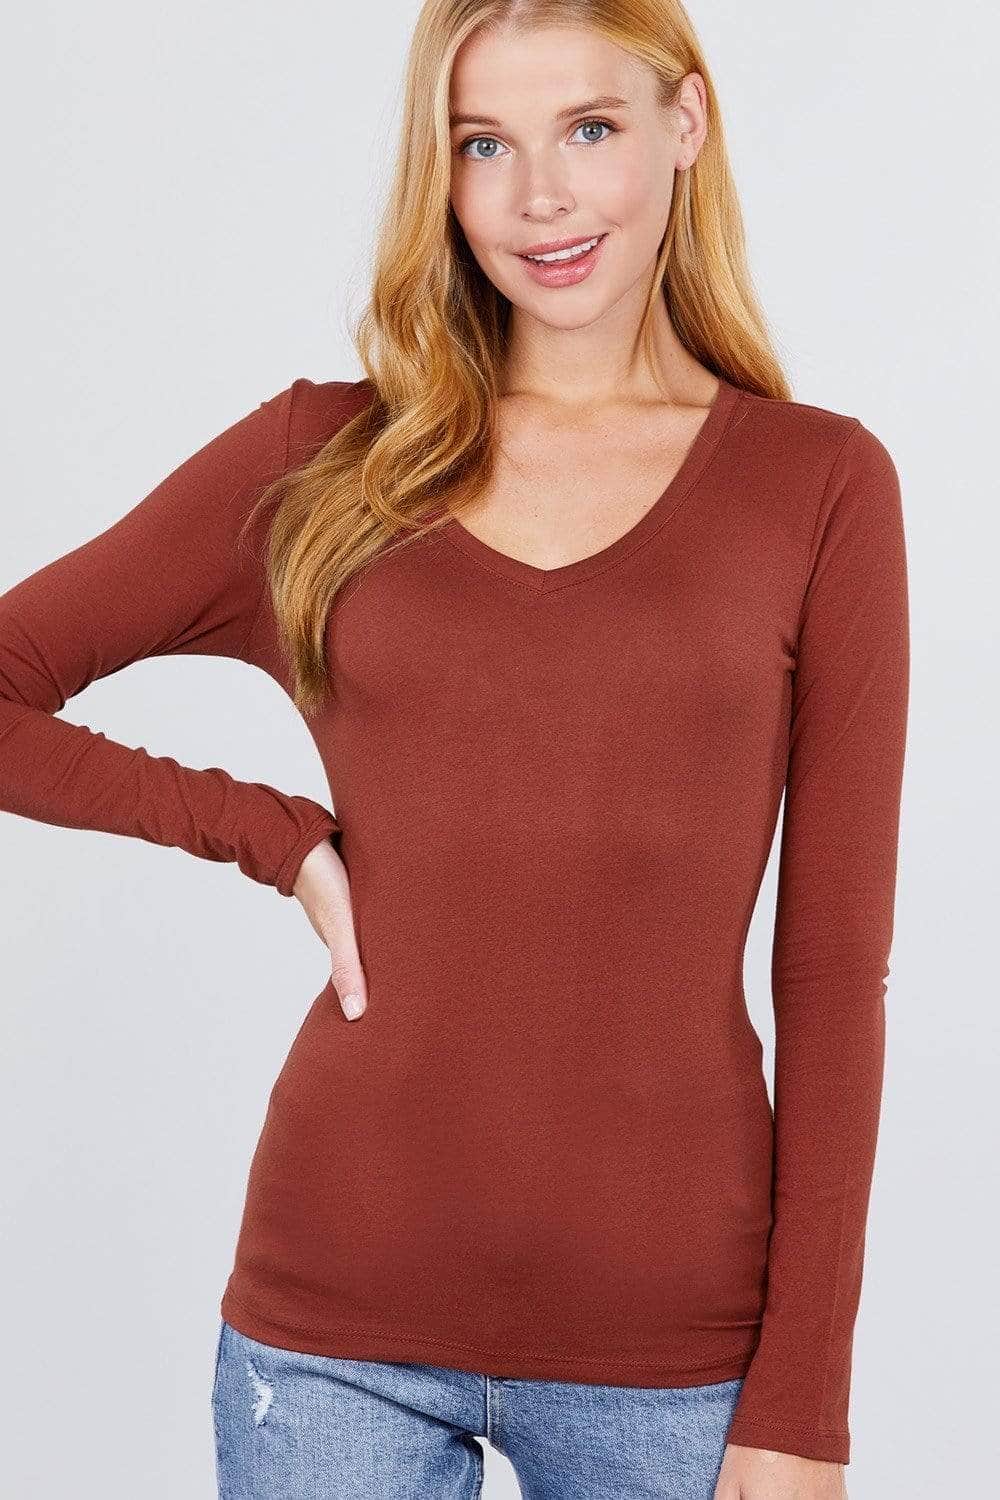 Cotton Jersey V-neck Top-TOPS / DRESSES-[Adult]-[Female]-Dark Rust-S-Blue Zone Planet